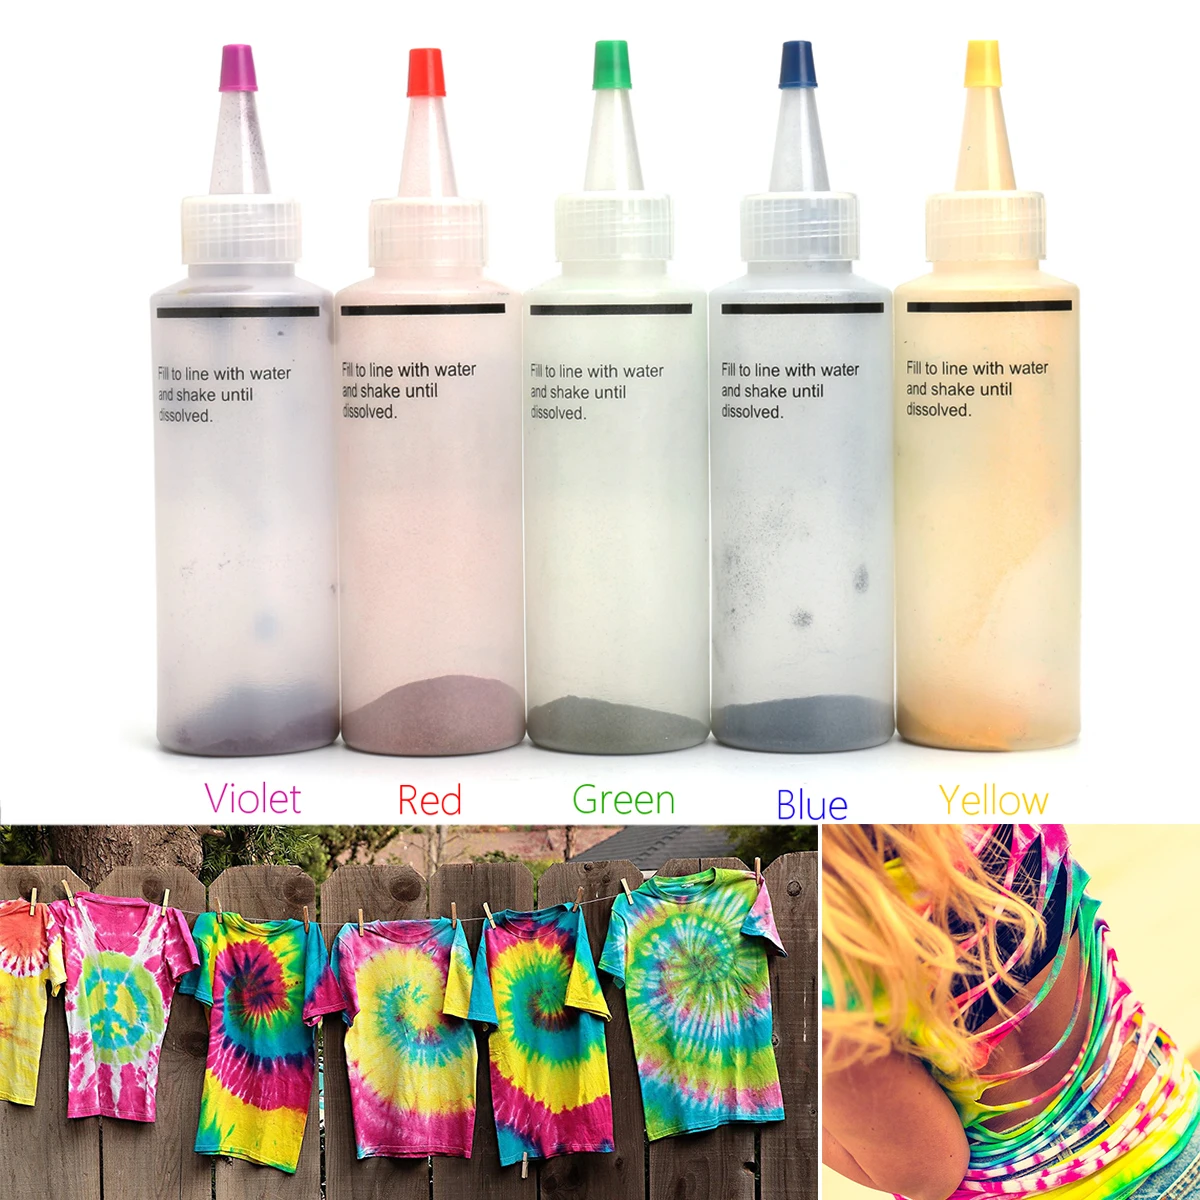 

5 Colors/set One-step Tie Dye Kit DIY Kits for Fabric Textile Craft Arts Clothes for Solo Projects Dyes Paint and Family Fun